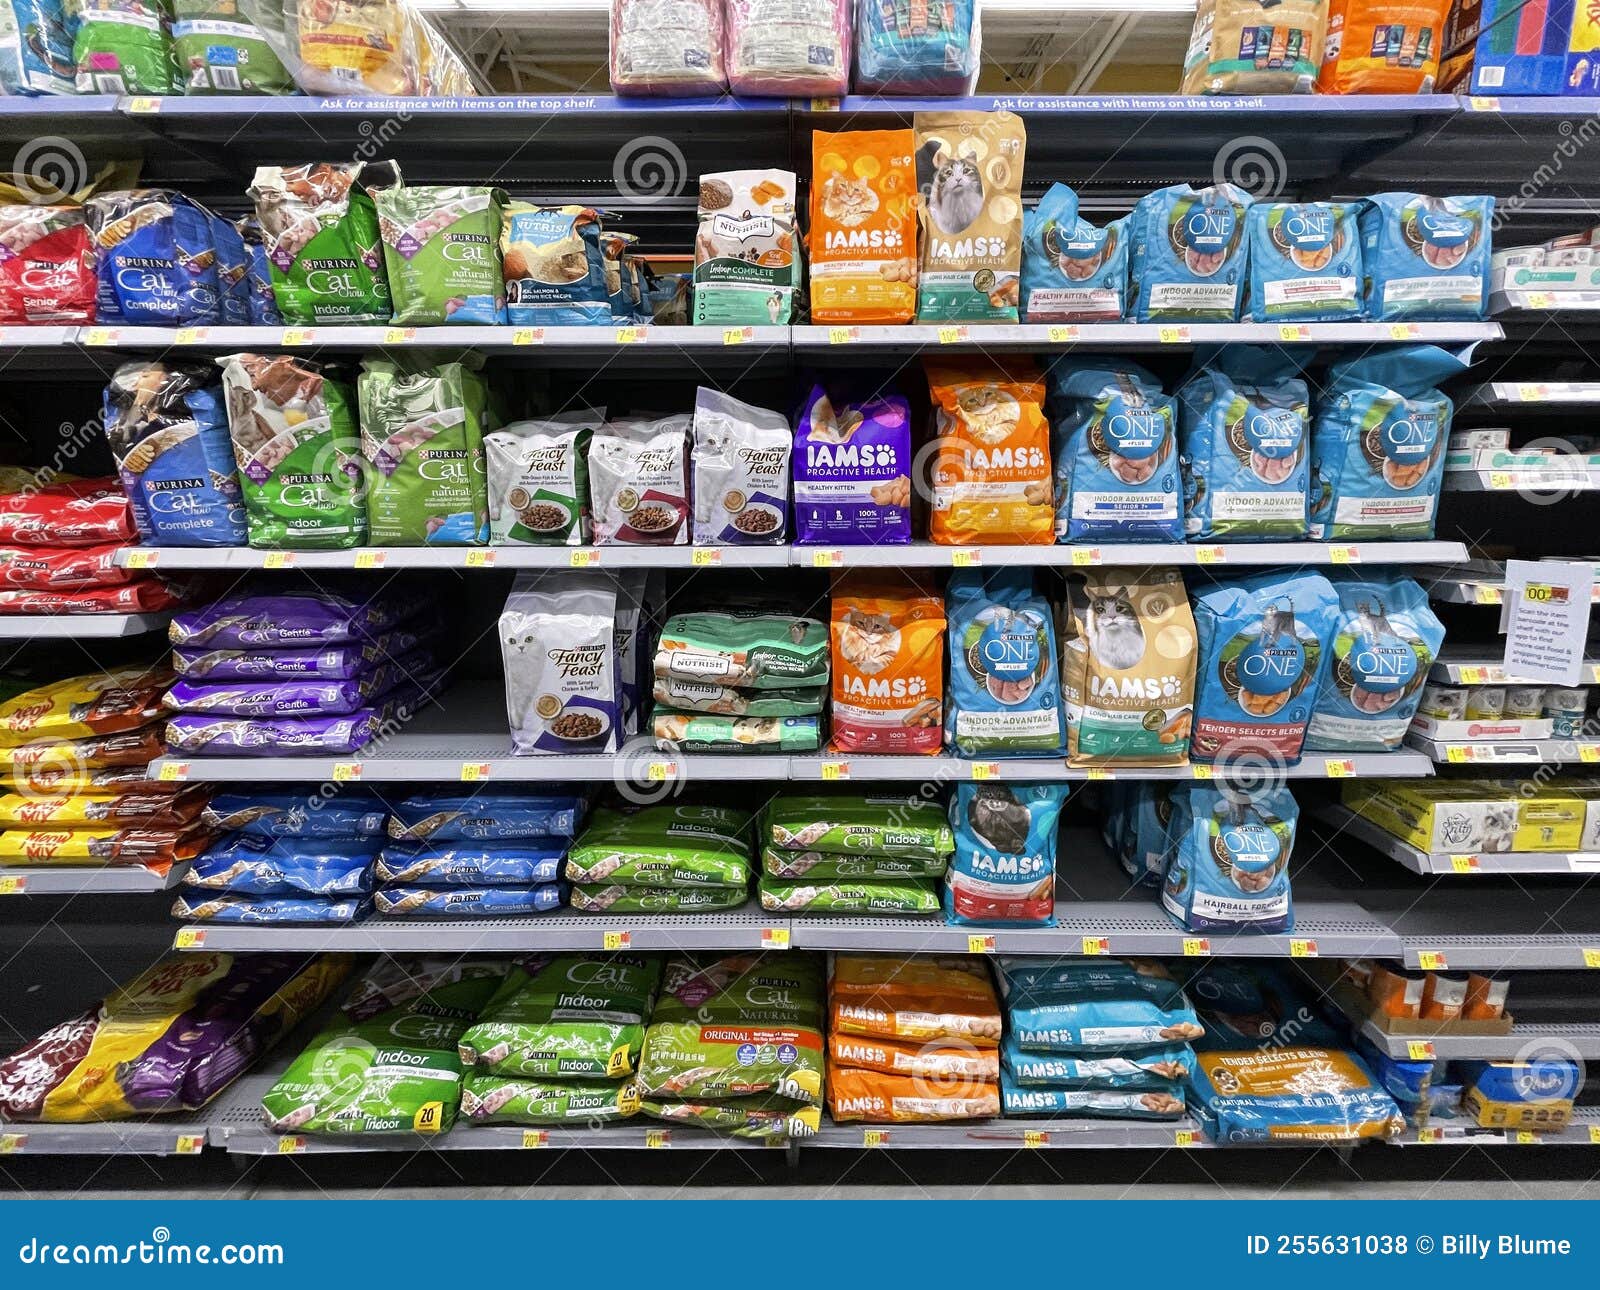 https://thumbs.dreamstime.com/z/walmart-grocery-store-interior-small-cat-food-bags-section-augusta-ga-usa-walmart-grocery-store-interior-small-cat-food-bags-255631038.jpg